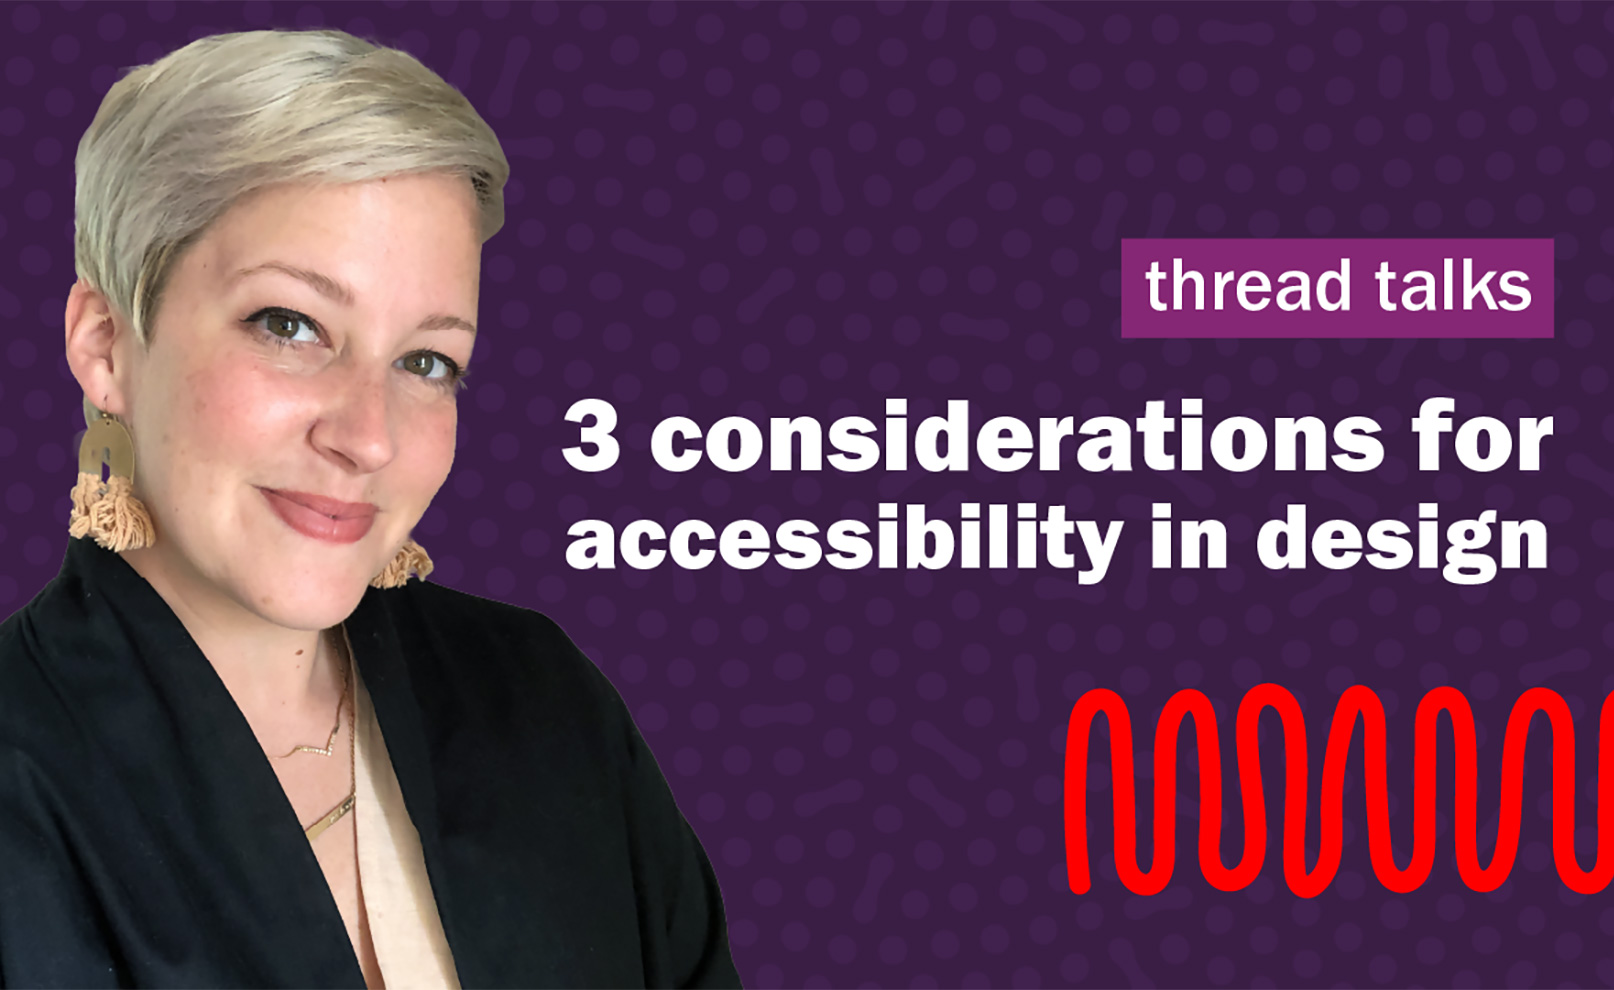 Watch the video: 3 considerations for accessibility in design